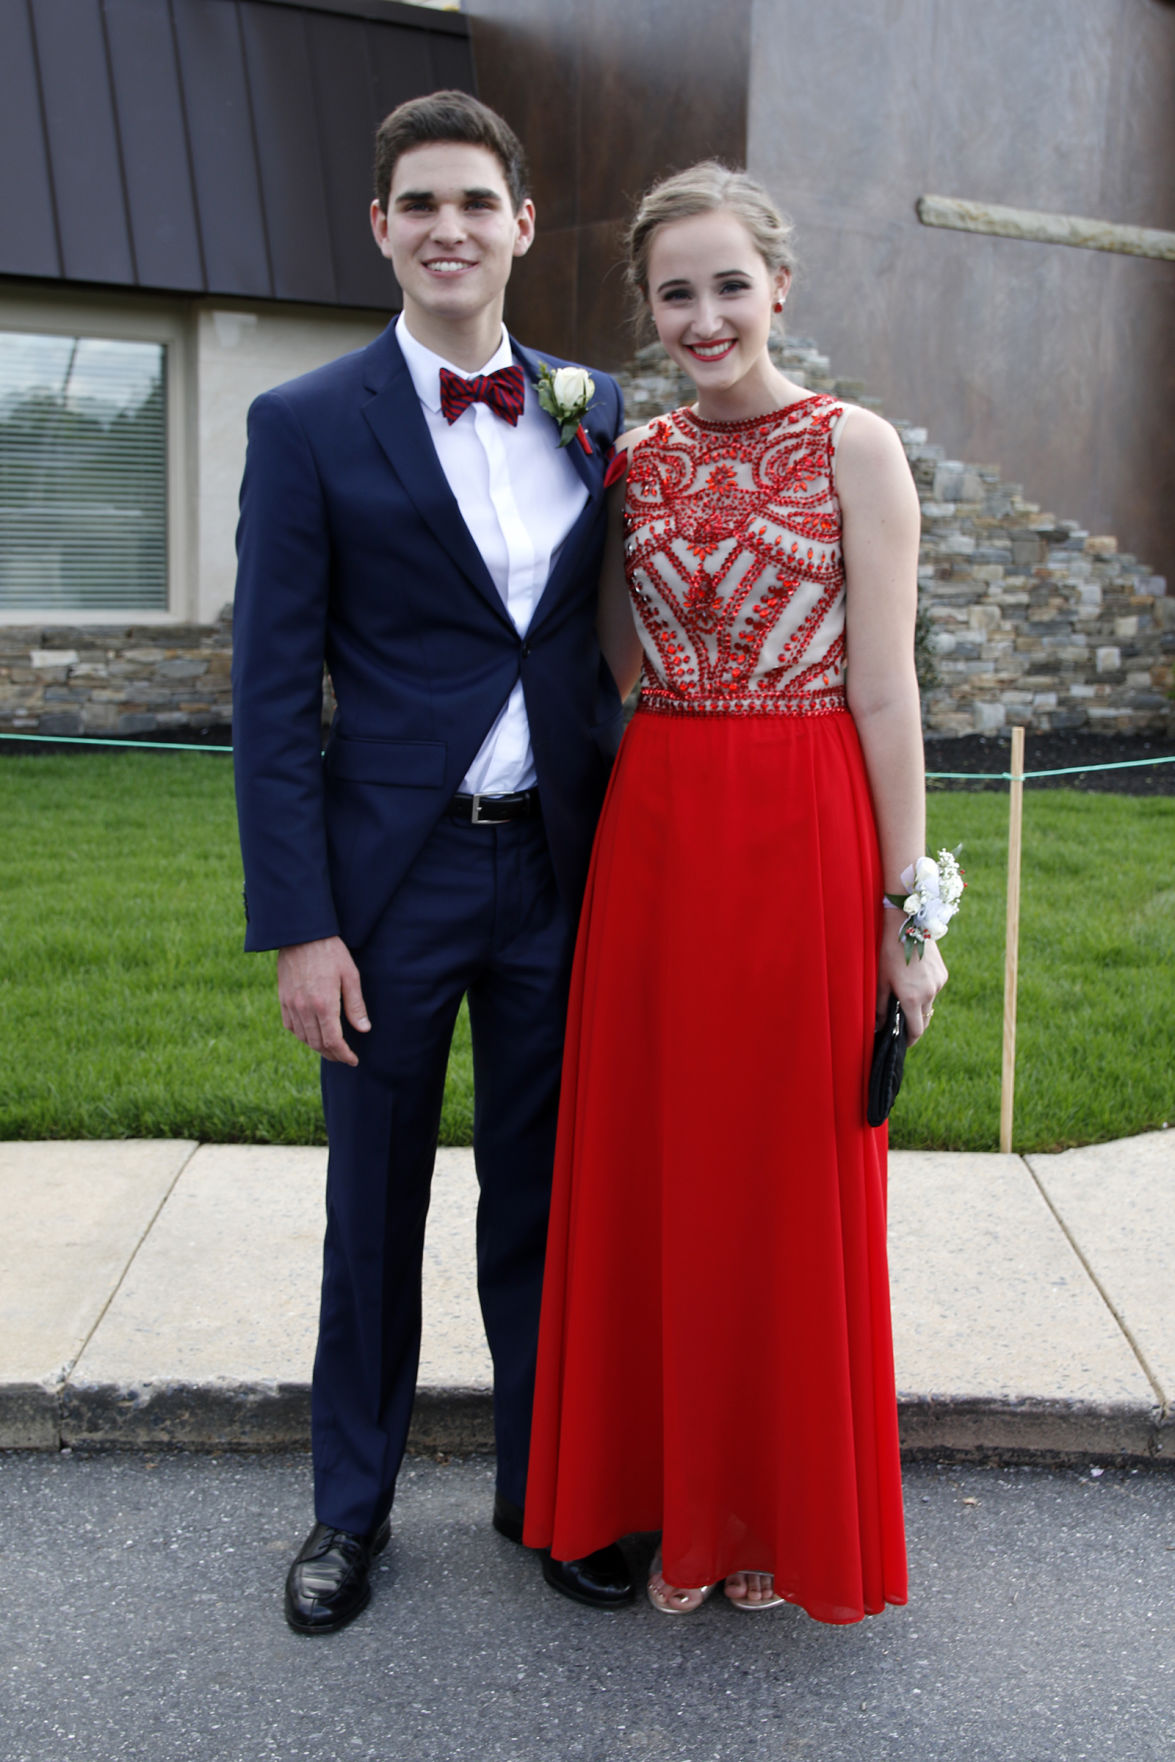 Manheim Central High School Prom 2016 | Special Sections